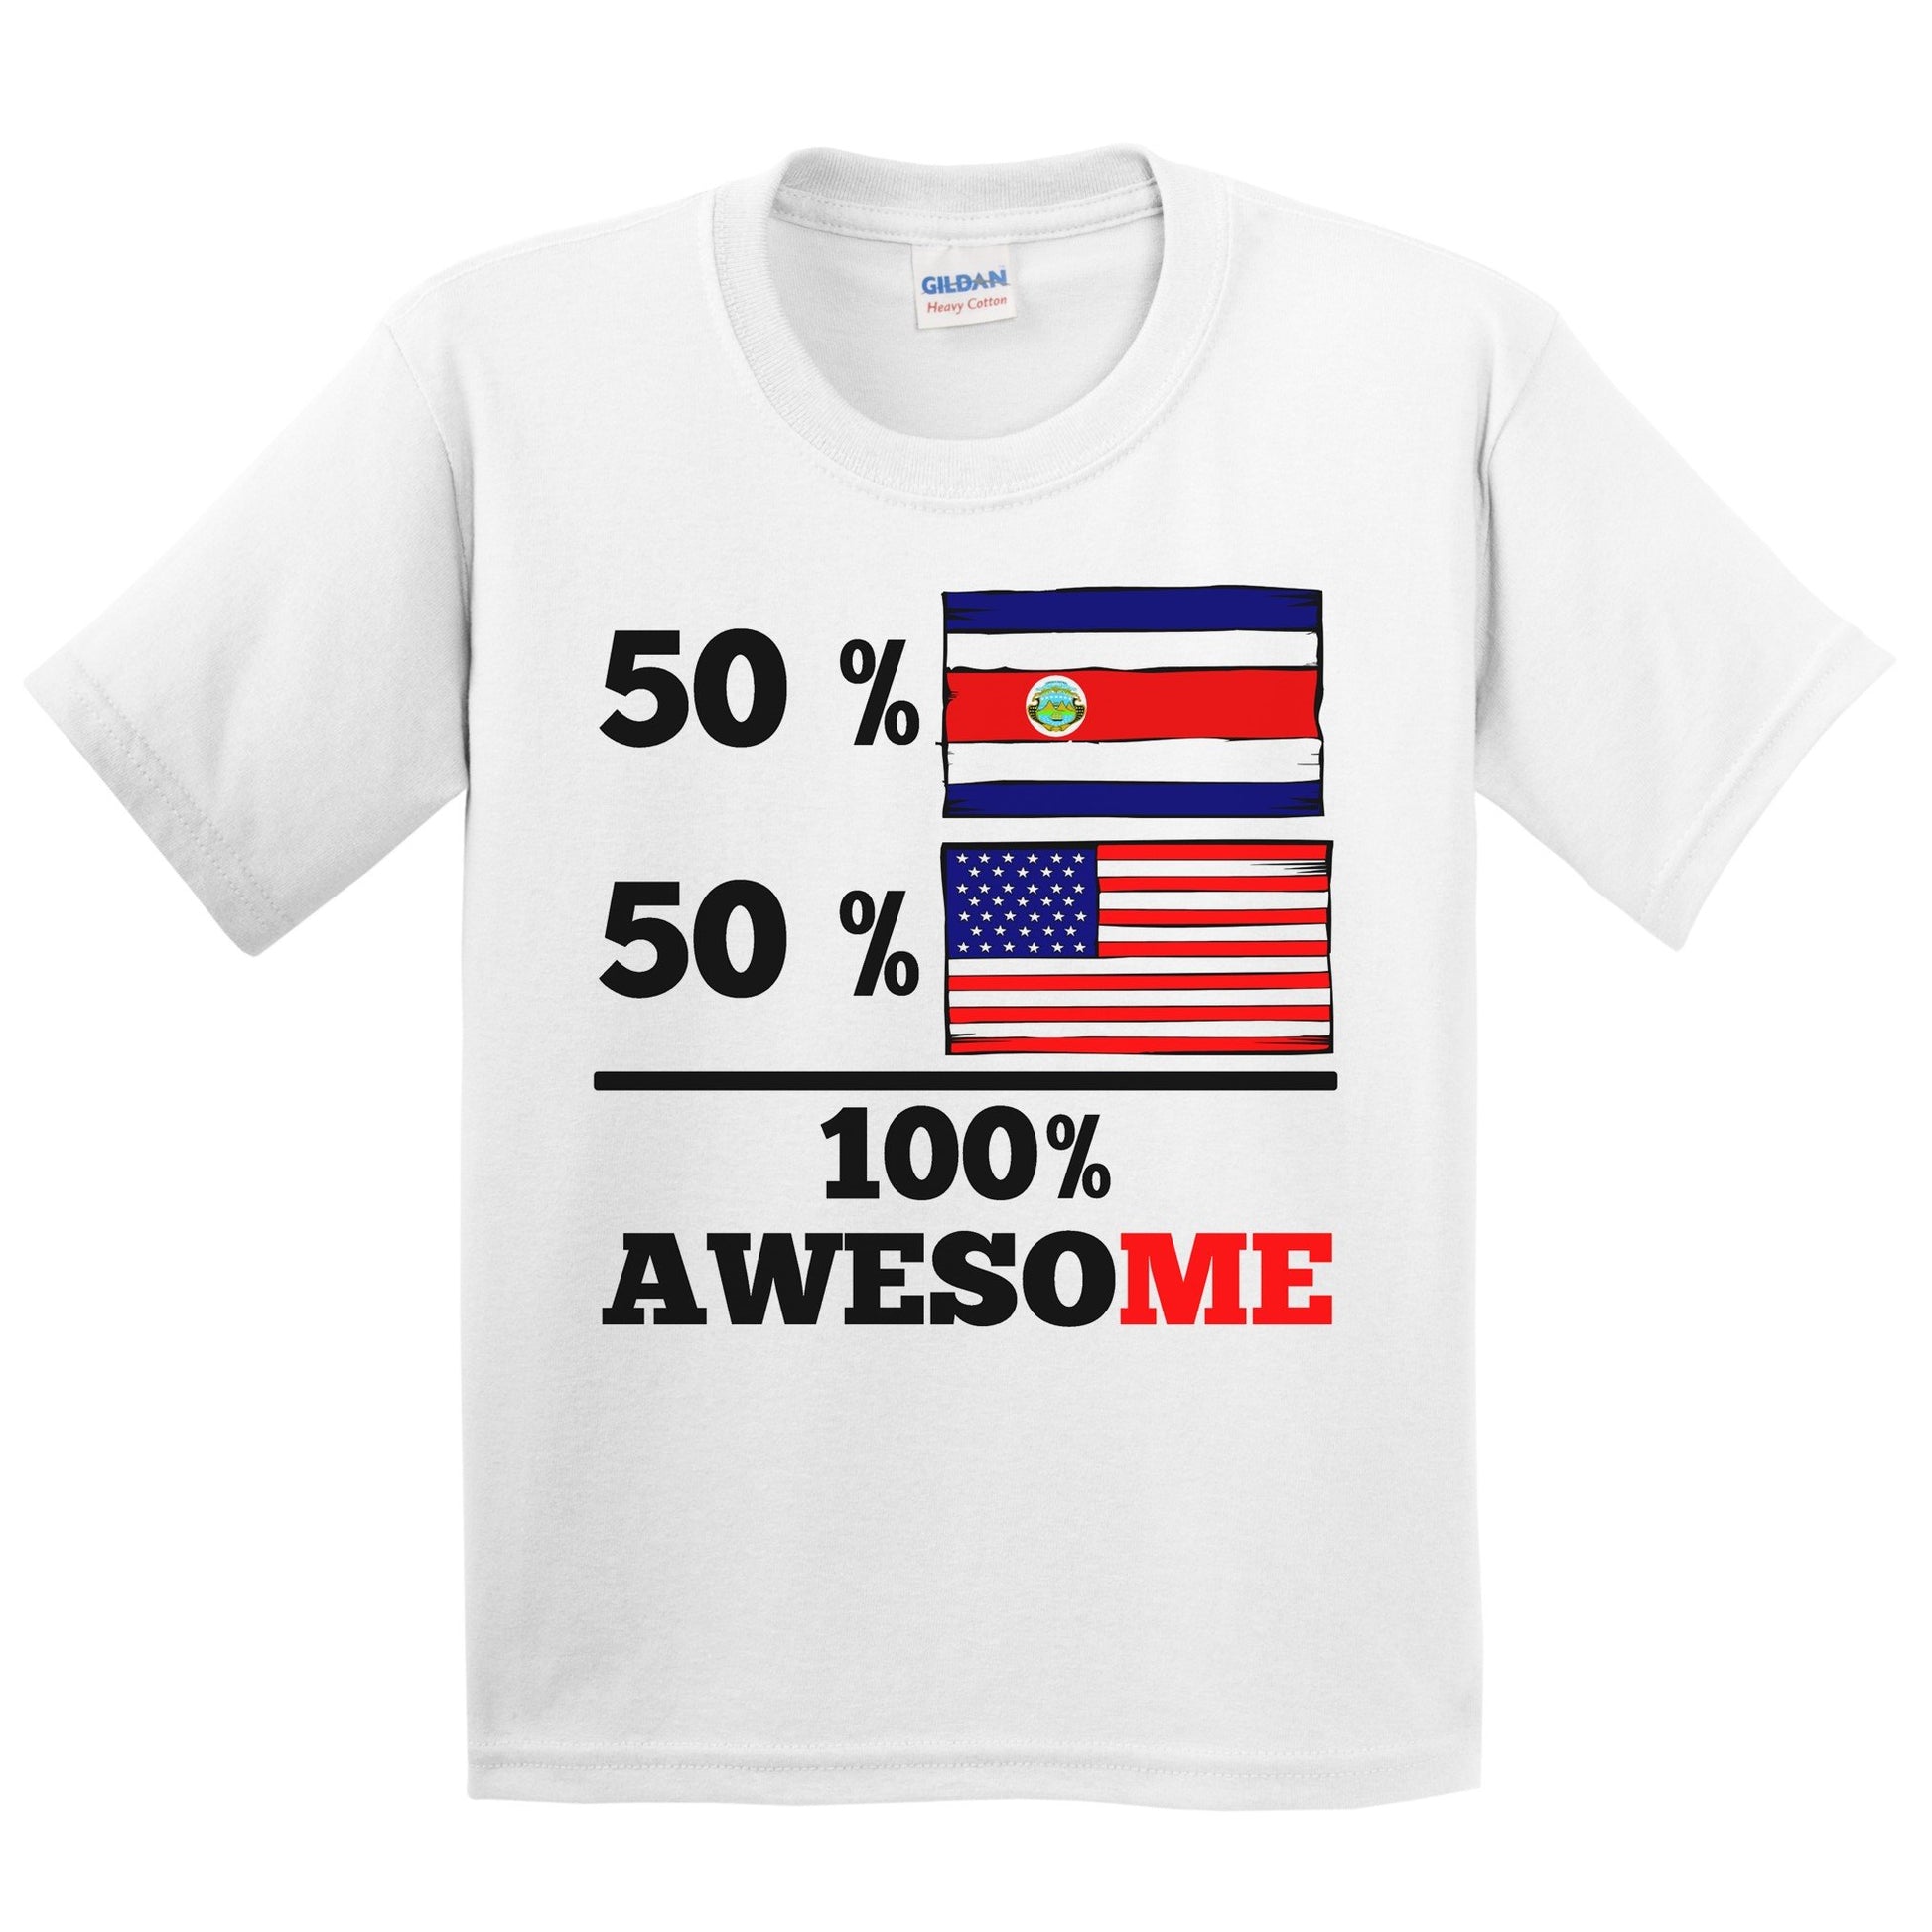 50% Costa Rican 50% American 100% Awesome Kids Youth T-Shirt